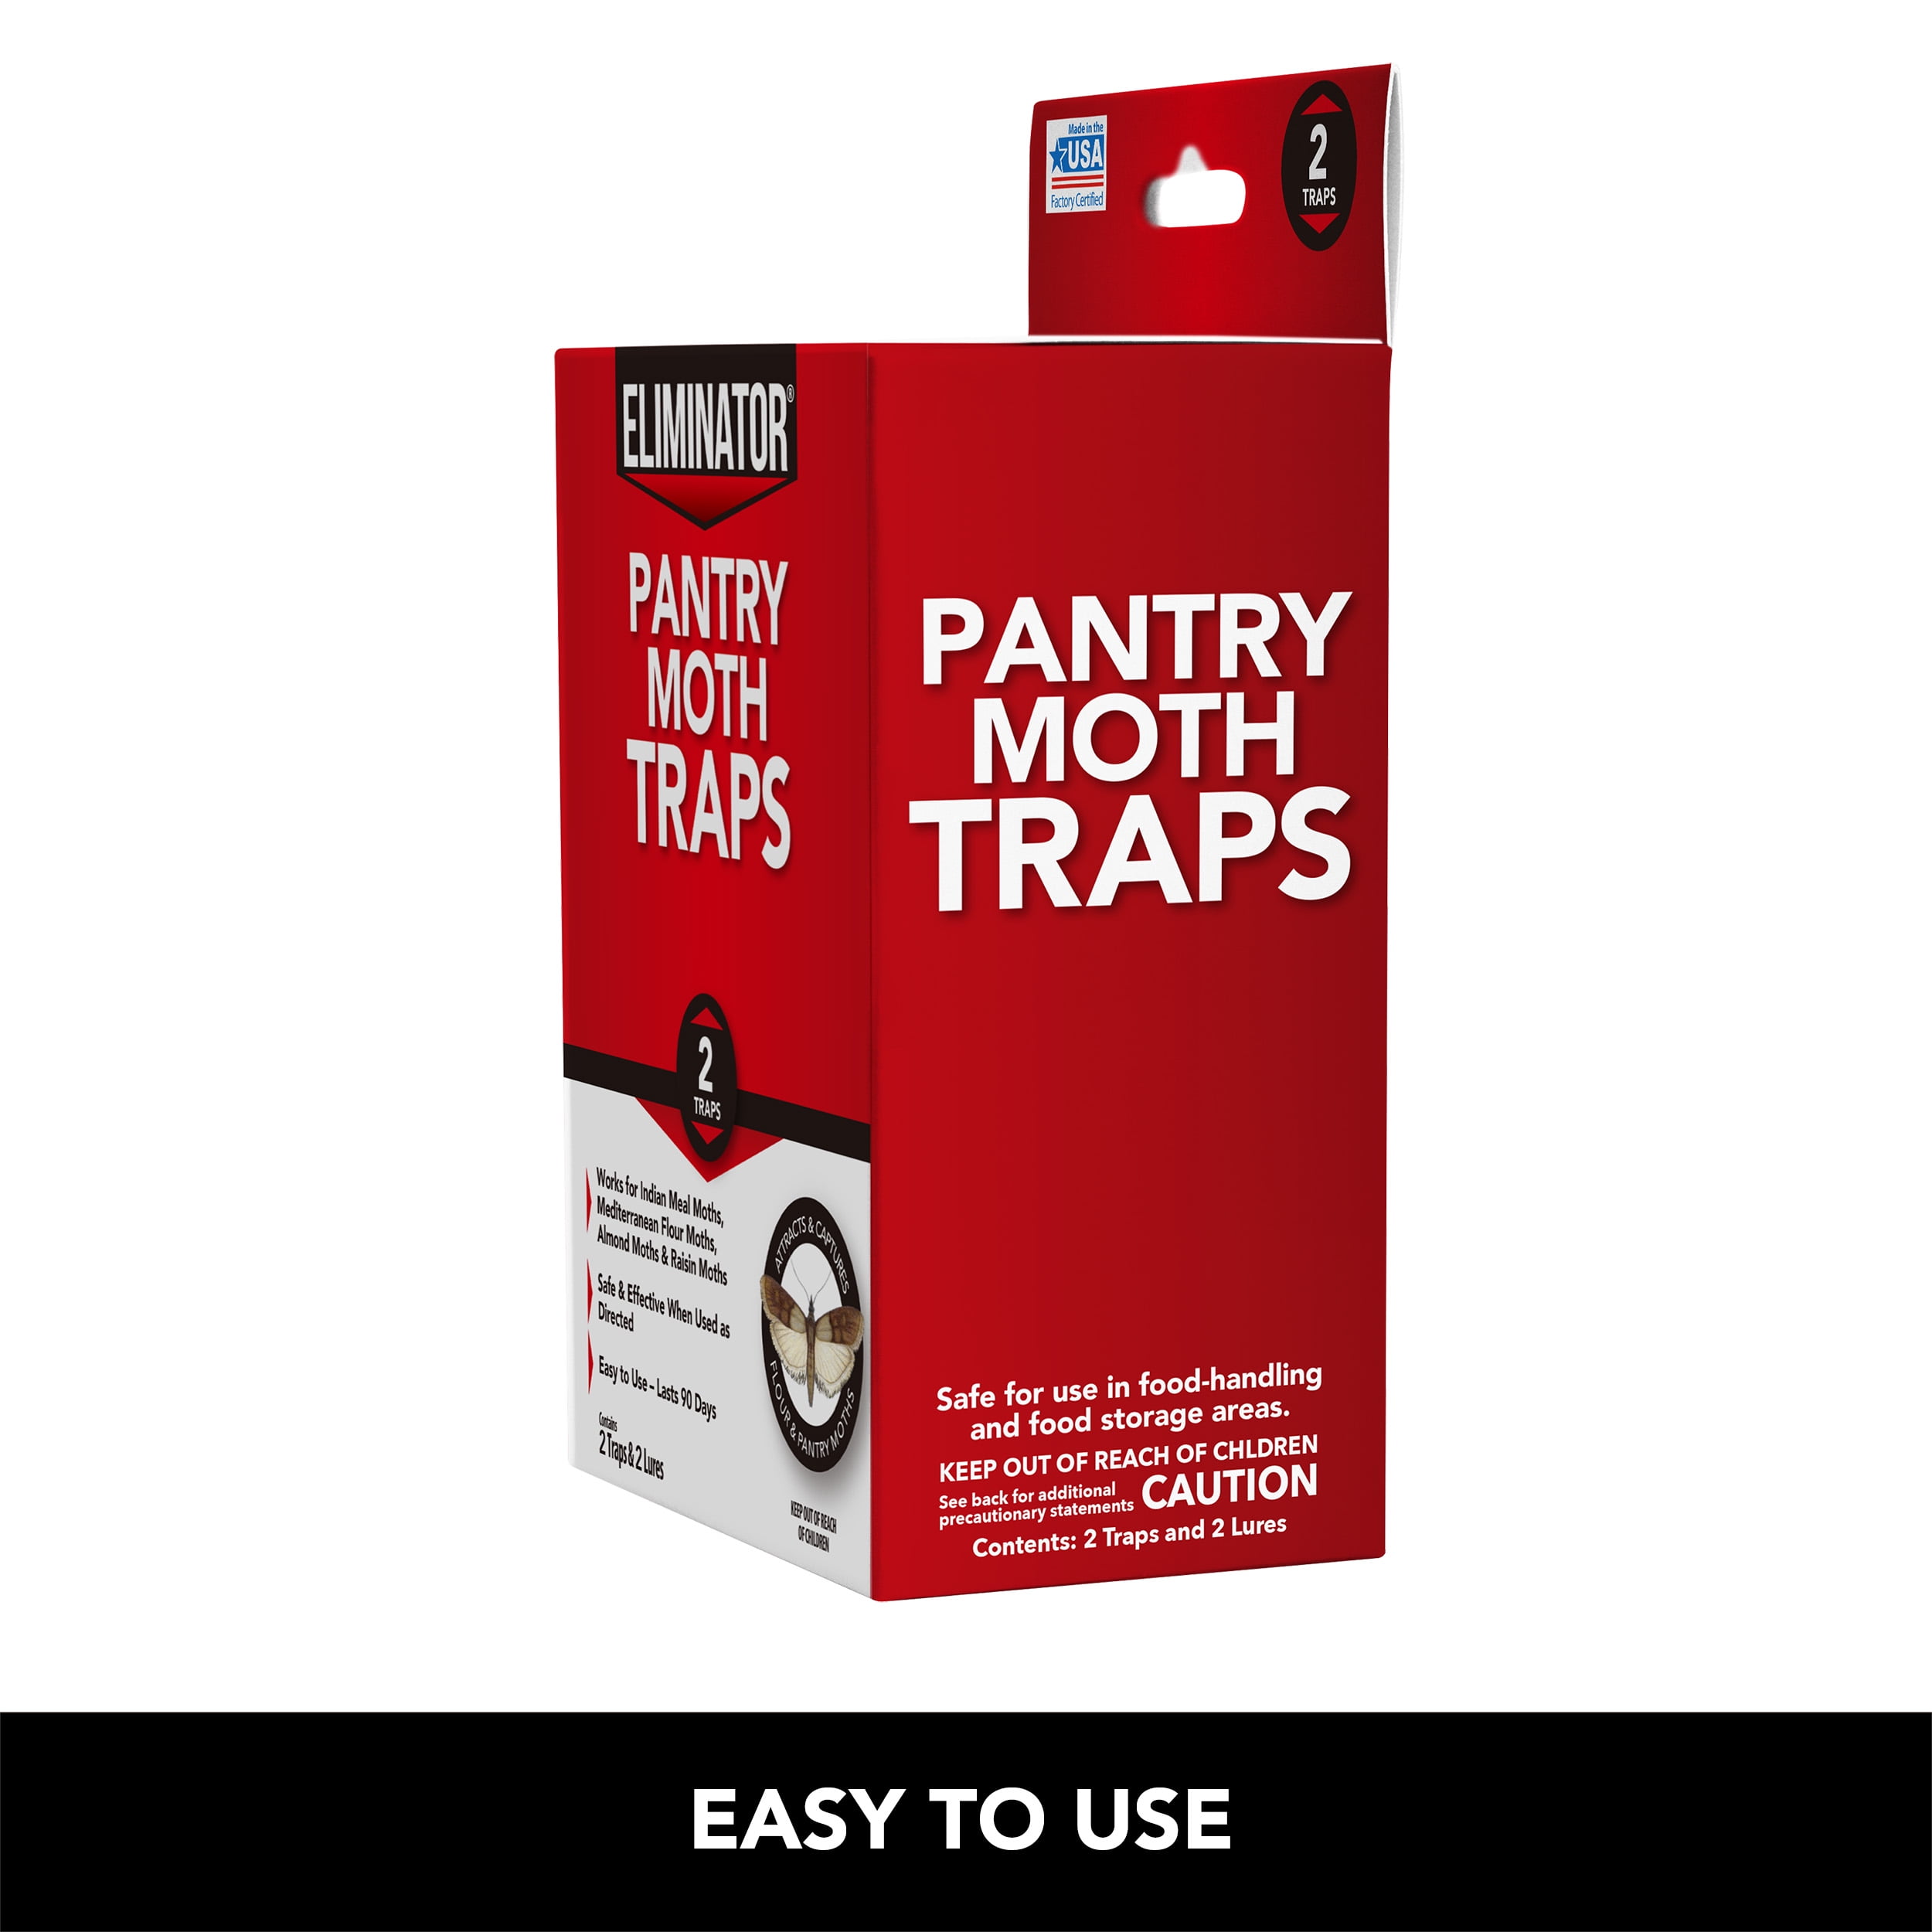 MaxGuard Pantry Moth Traps (24 Pack) with Extra Strength Pheromones, Non-Toxic